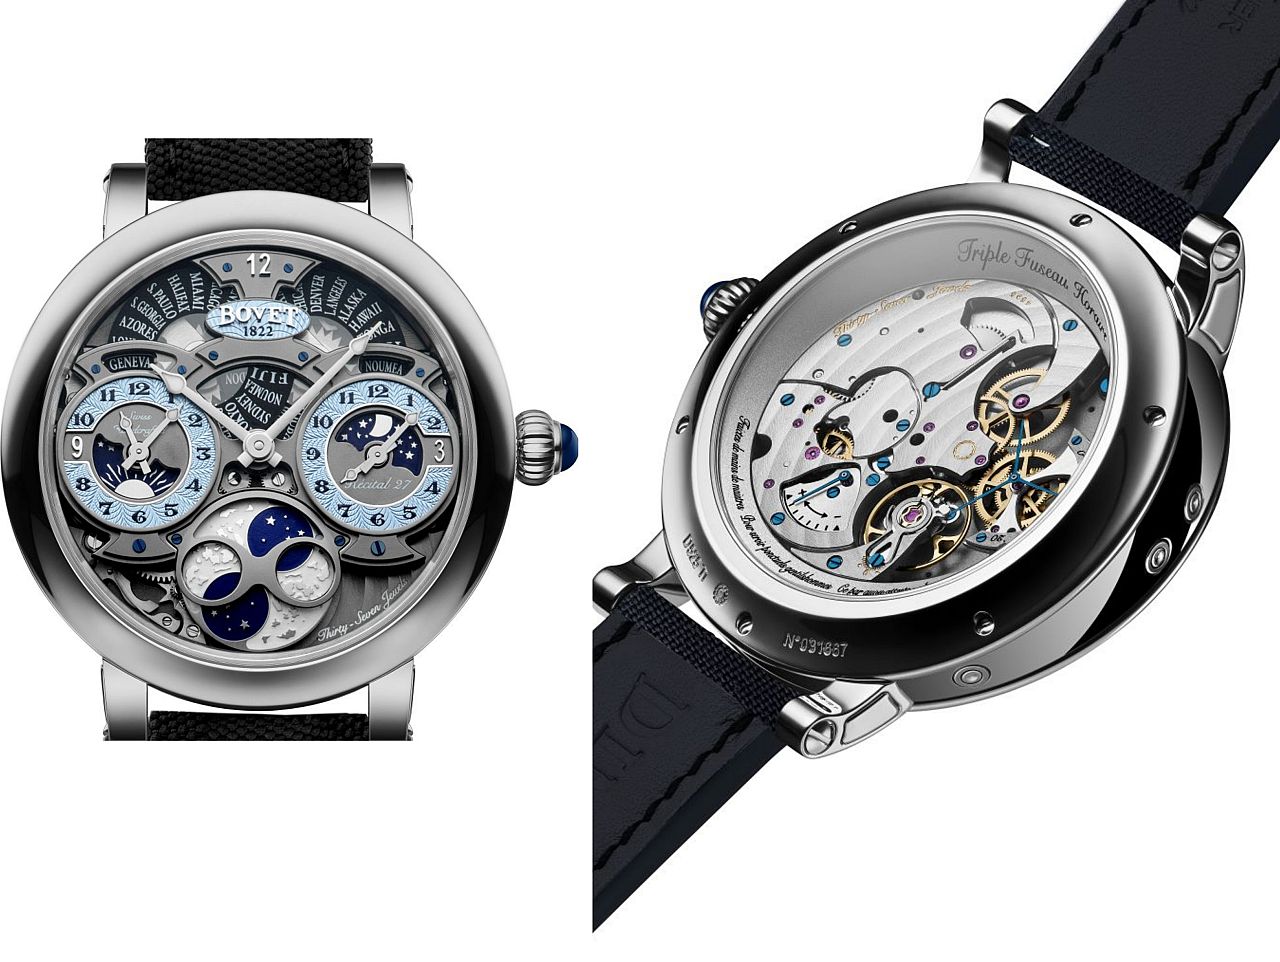 Going for a song - Bovet's Récital 27